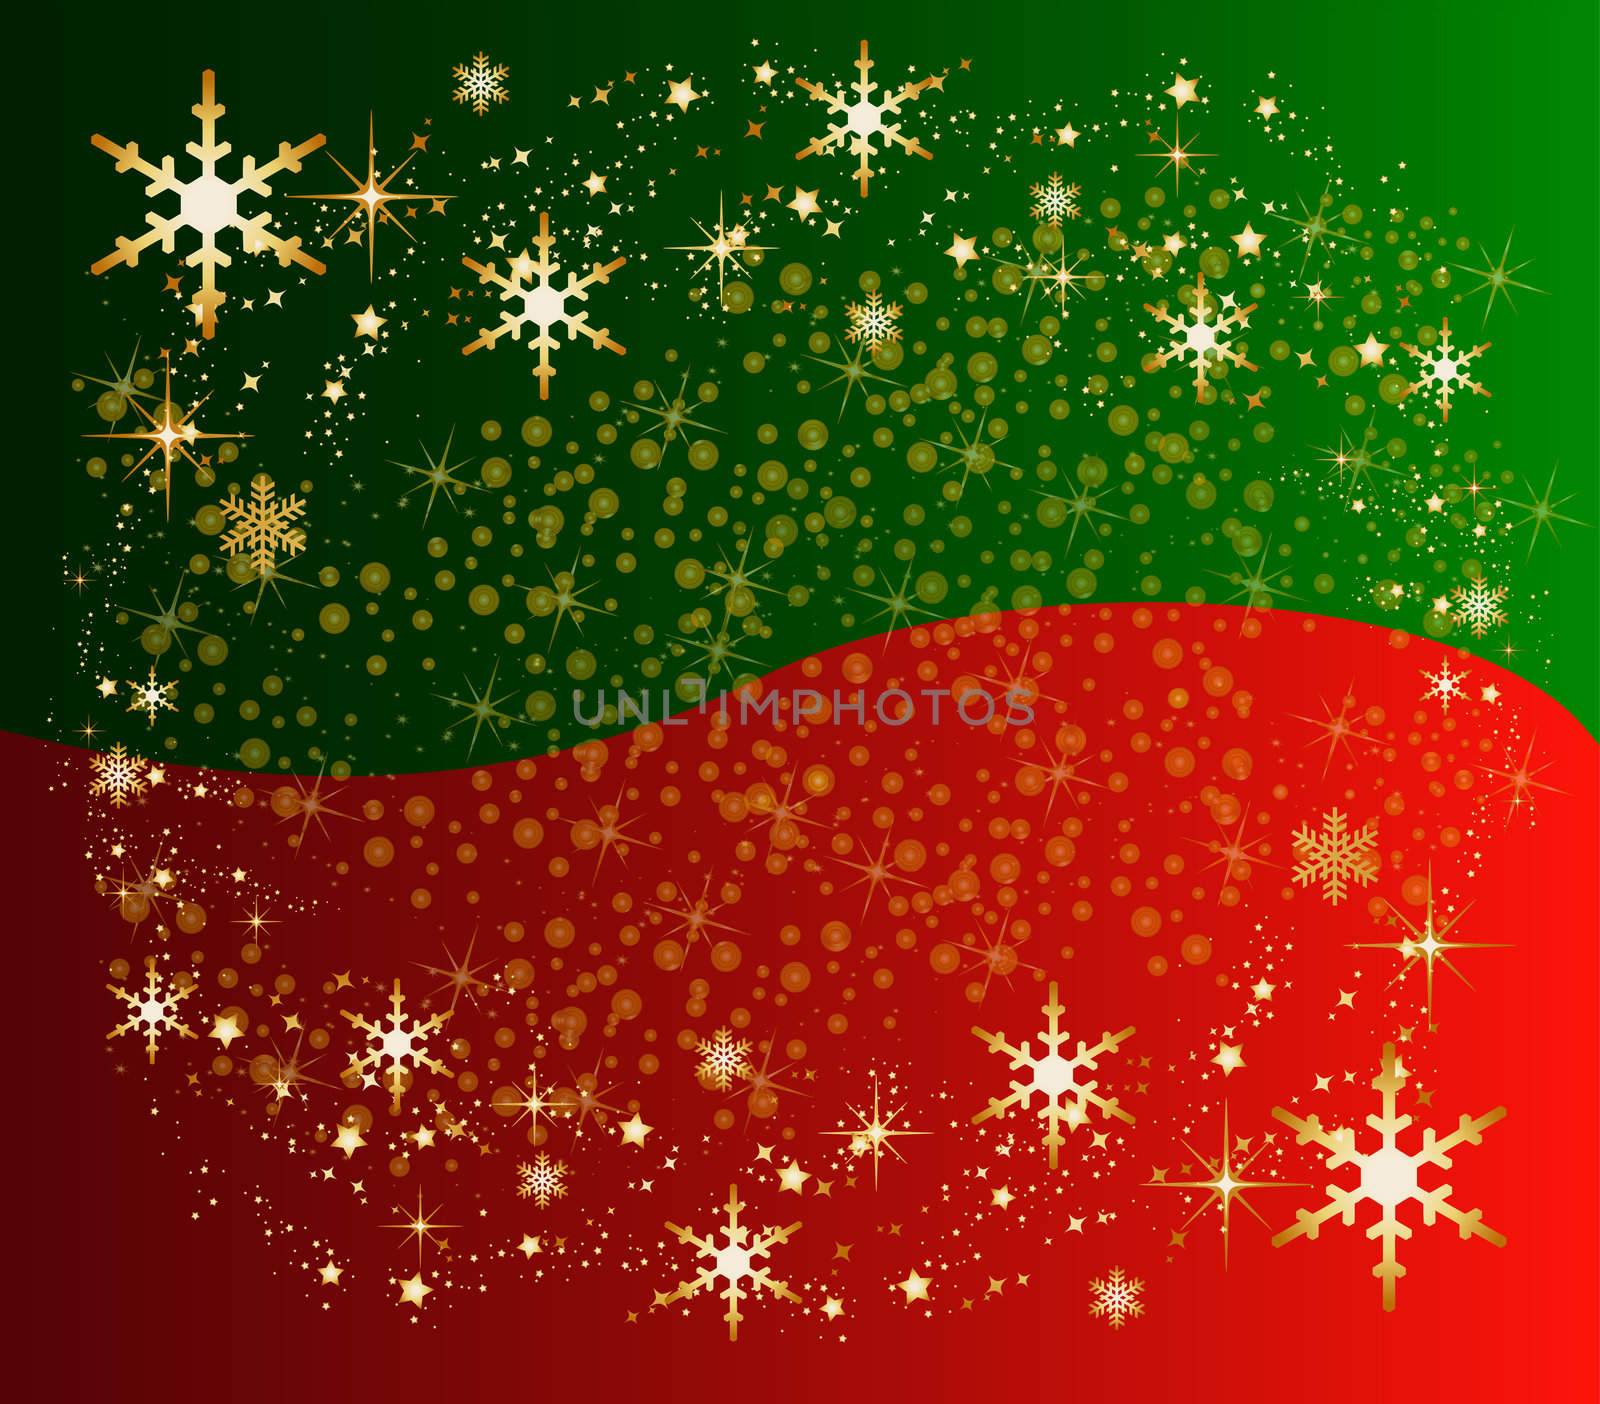  bicolor christmas background with stars by peromarketing